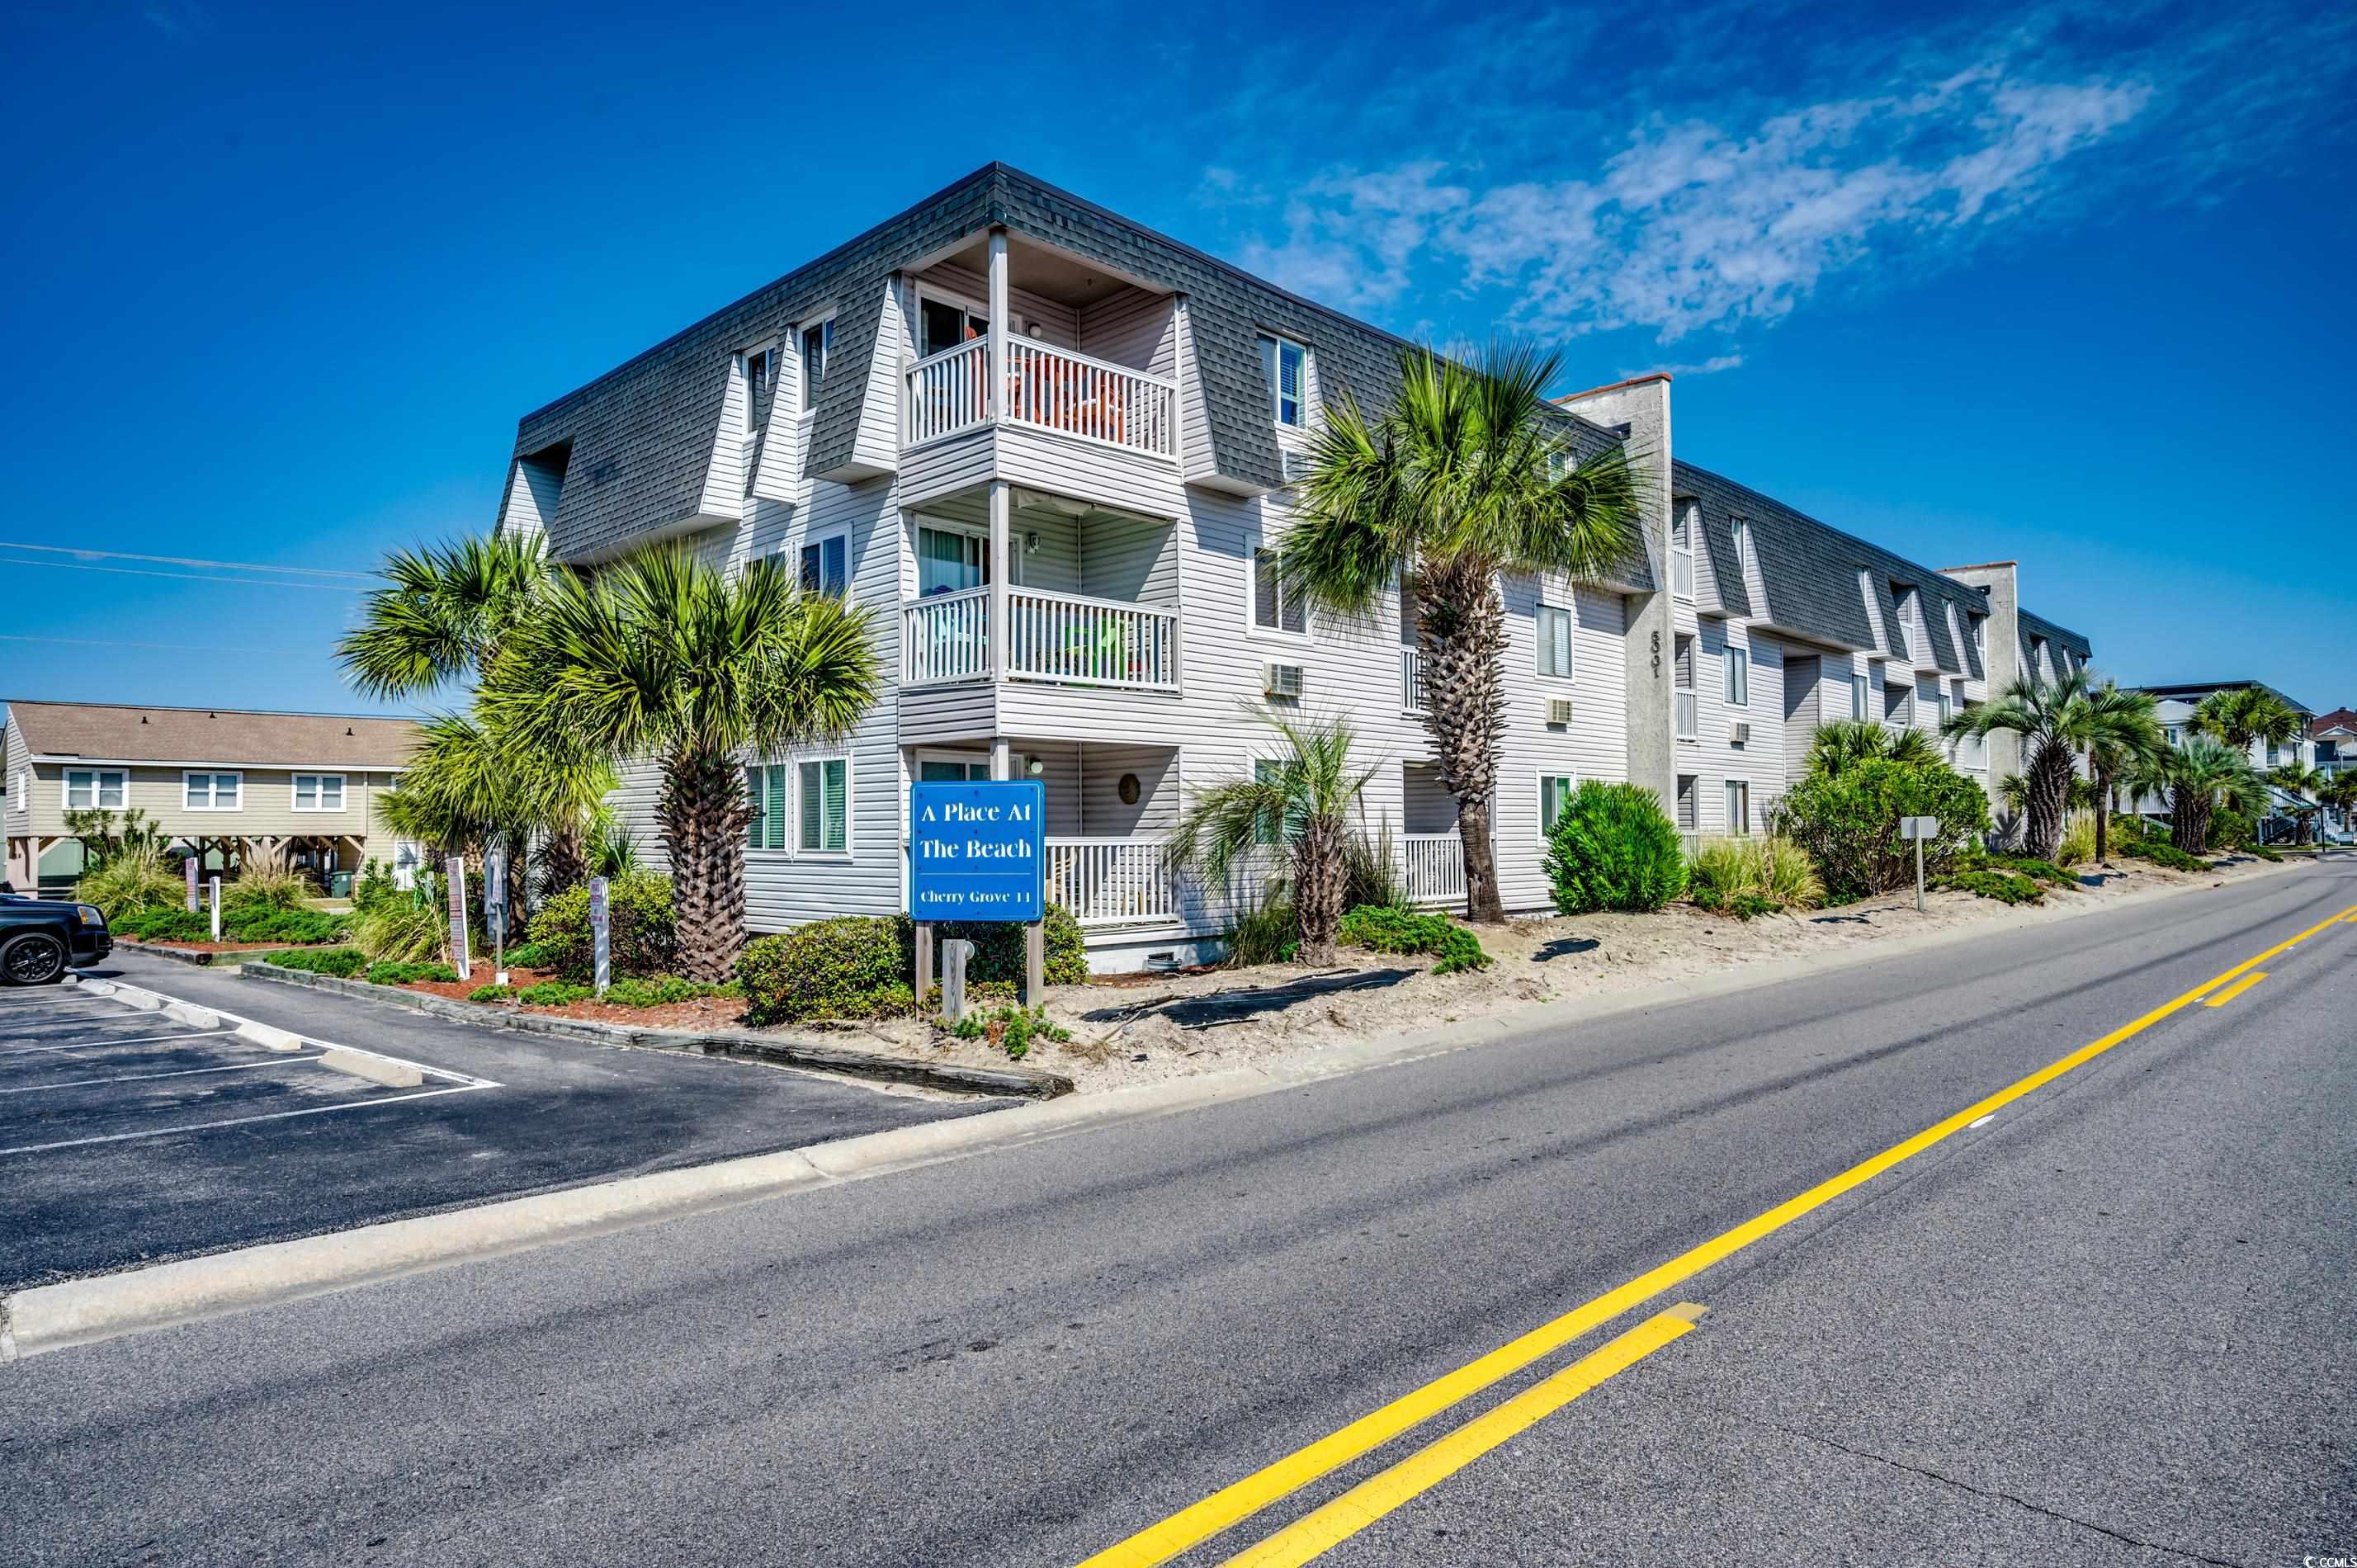 wow! incredible ocean views from this completely updated and upgraded, nicely furnished, 2 bedroom, 1 ½ bath third floor corner unit in a place at the beach ii in the cherry grove section of north myrtle beach. this end unit has so many nice features including tile and luxury vinyl plank flooring, lots of windows and natural light, stainless steel appliances, updated cabinets, subway tile backsplash, nice colors, tiled walk-in shower with glass doors, shades and blinds, updated fixtures and hardware, and updated vanities. this unit is “turn-key” and could be easily used as a second home, rental, or primary residence. complex has pool and lots of public beach access and parking nearby.